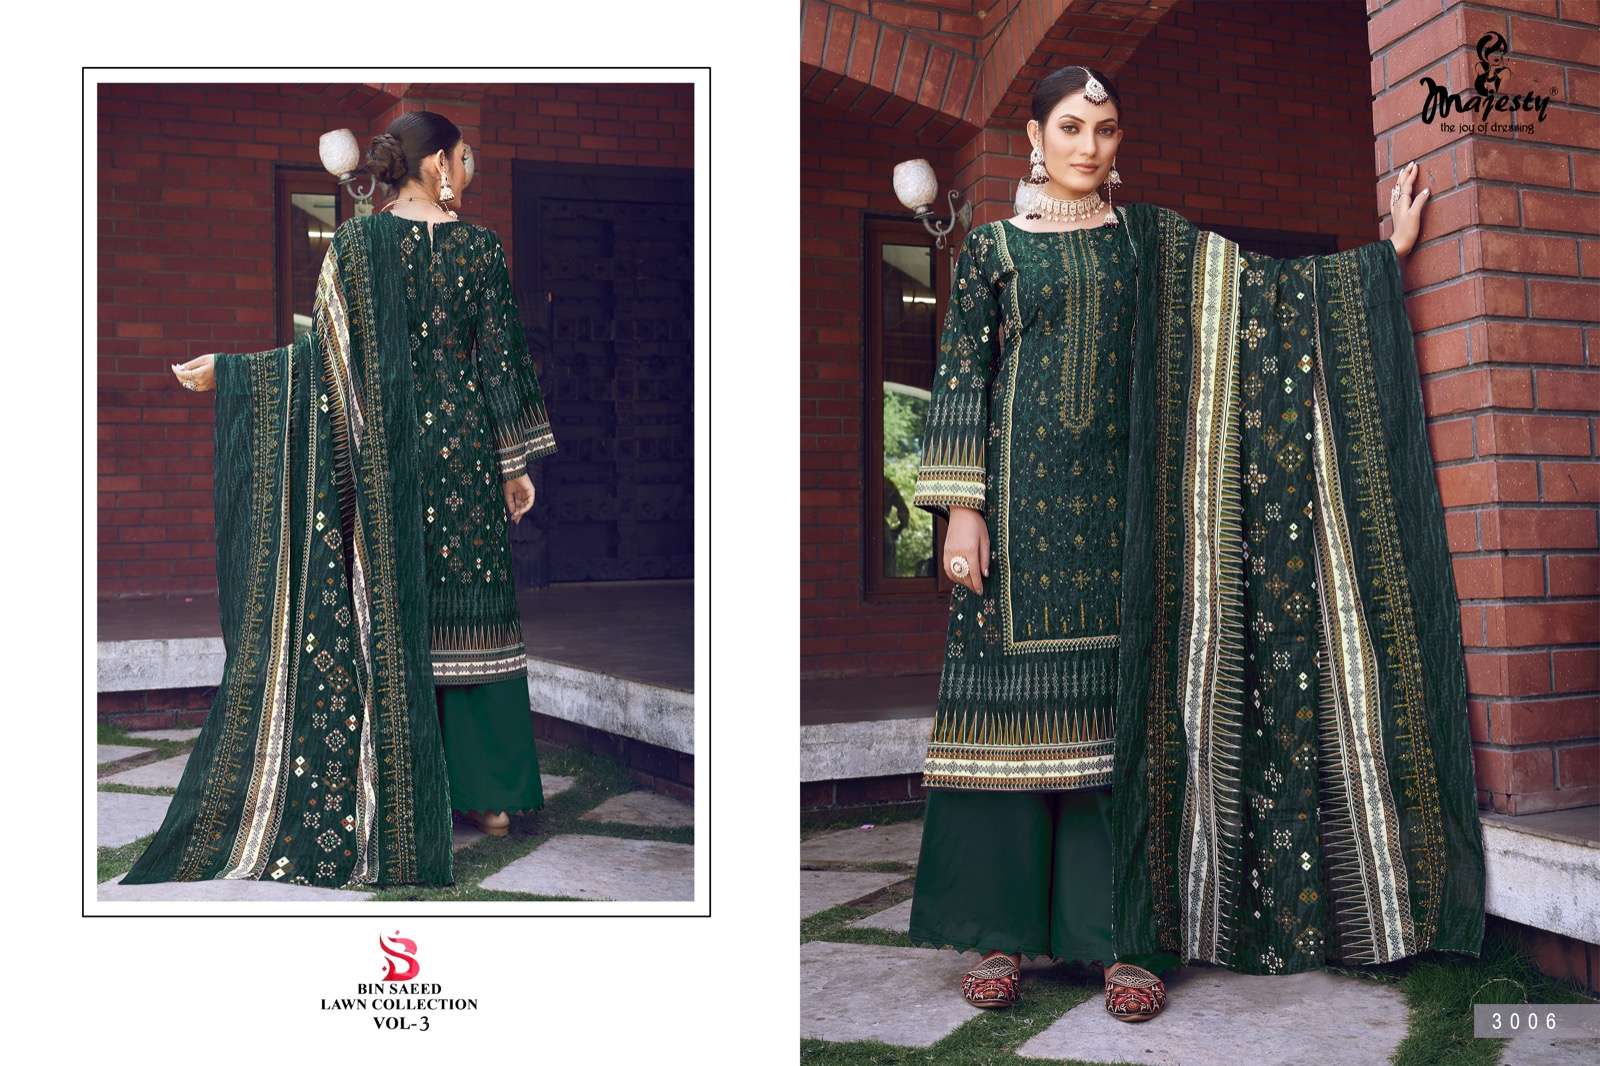 MAJESTY BIN SAEED LAWN COLLECTION VOL 3 